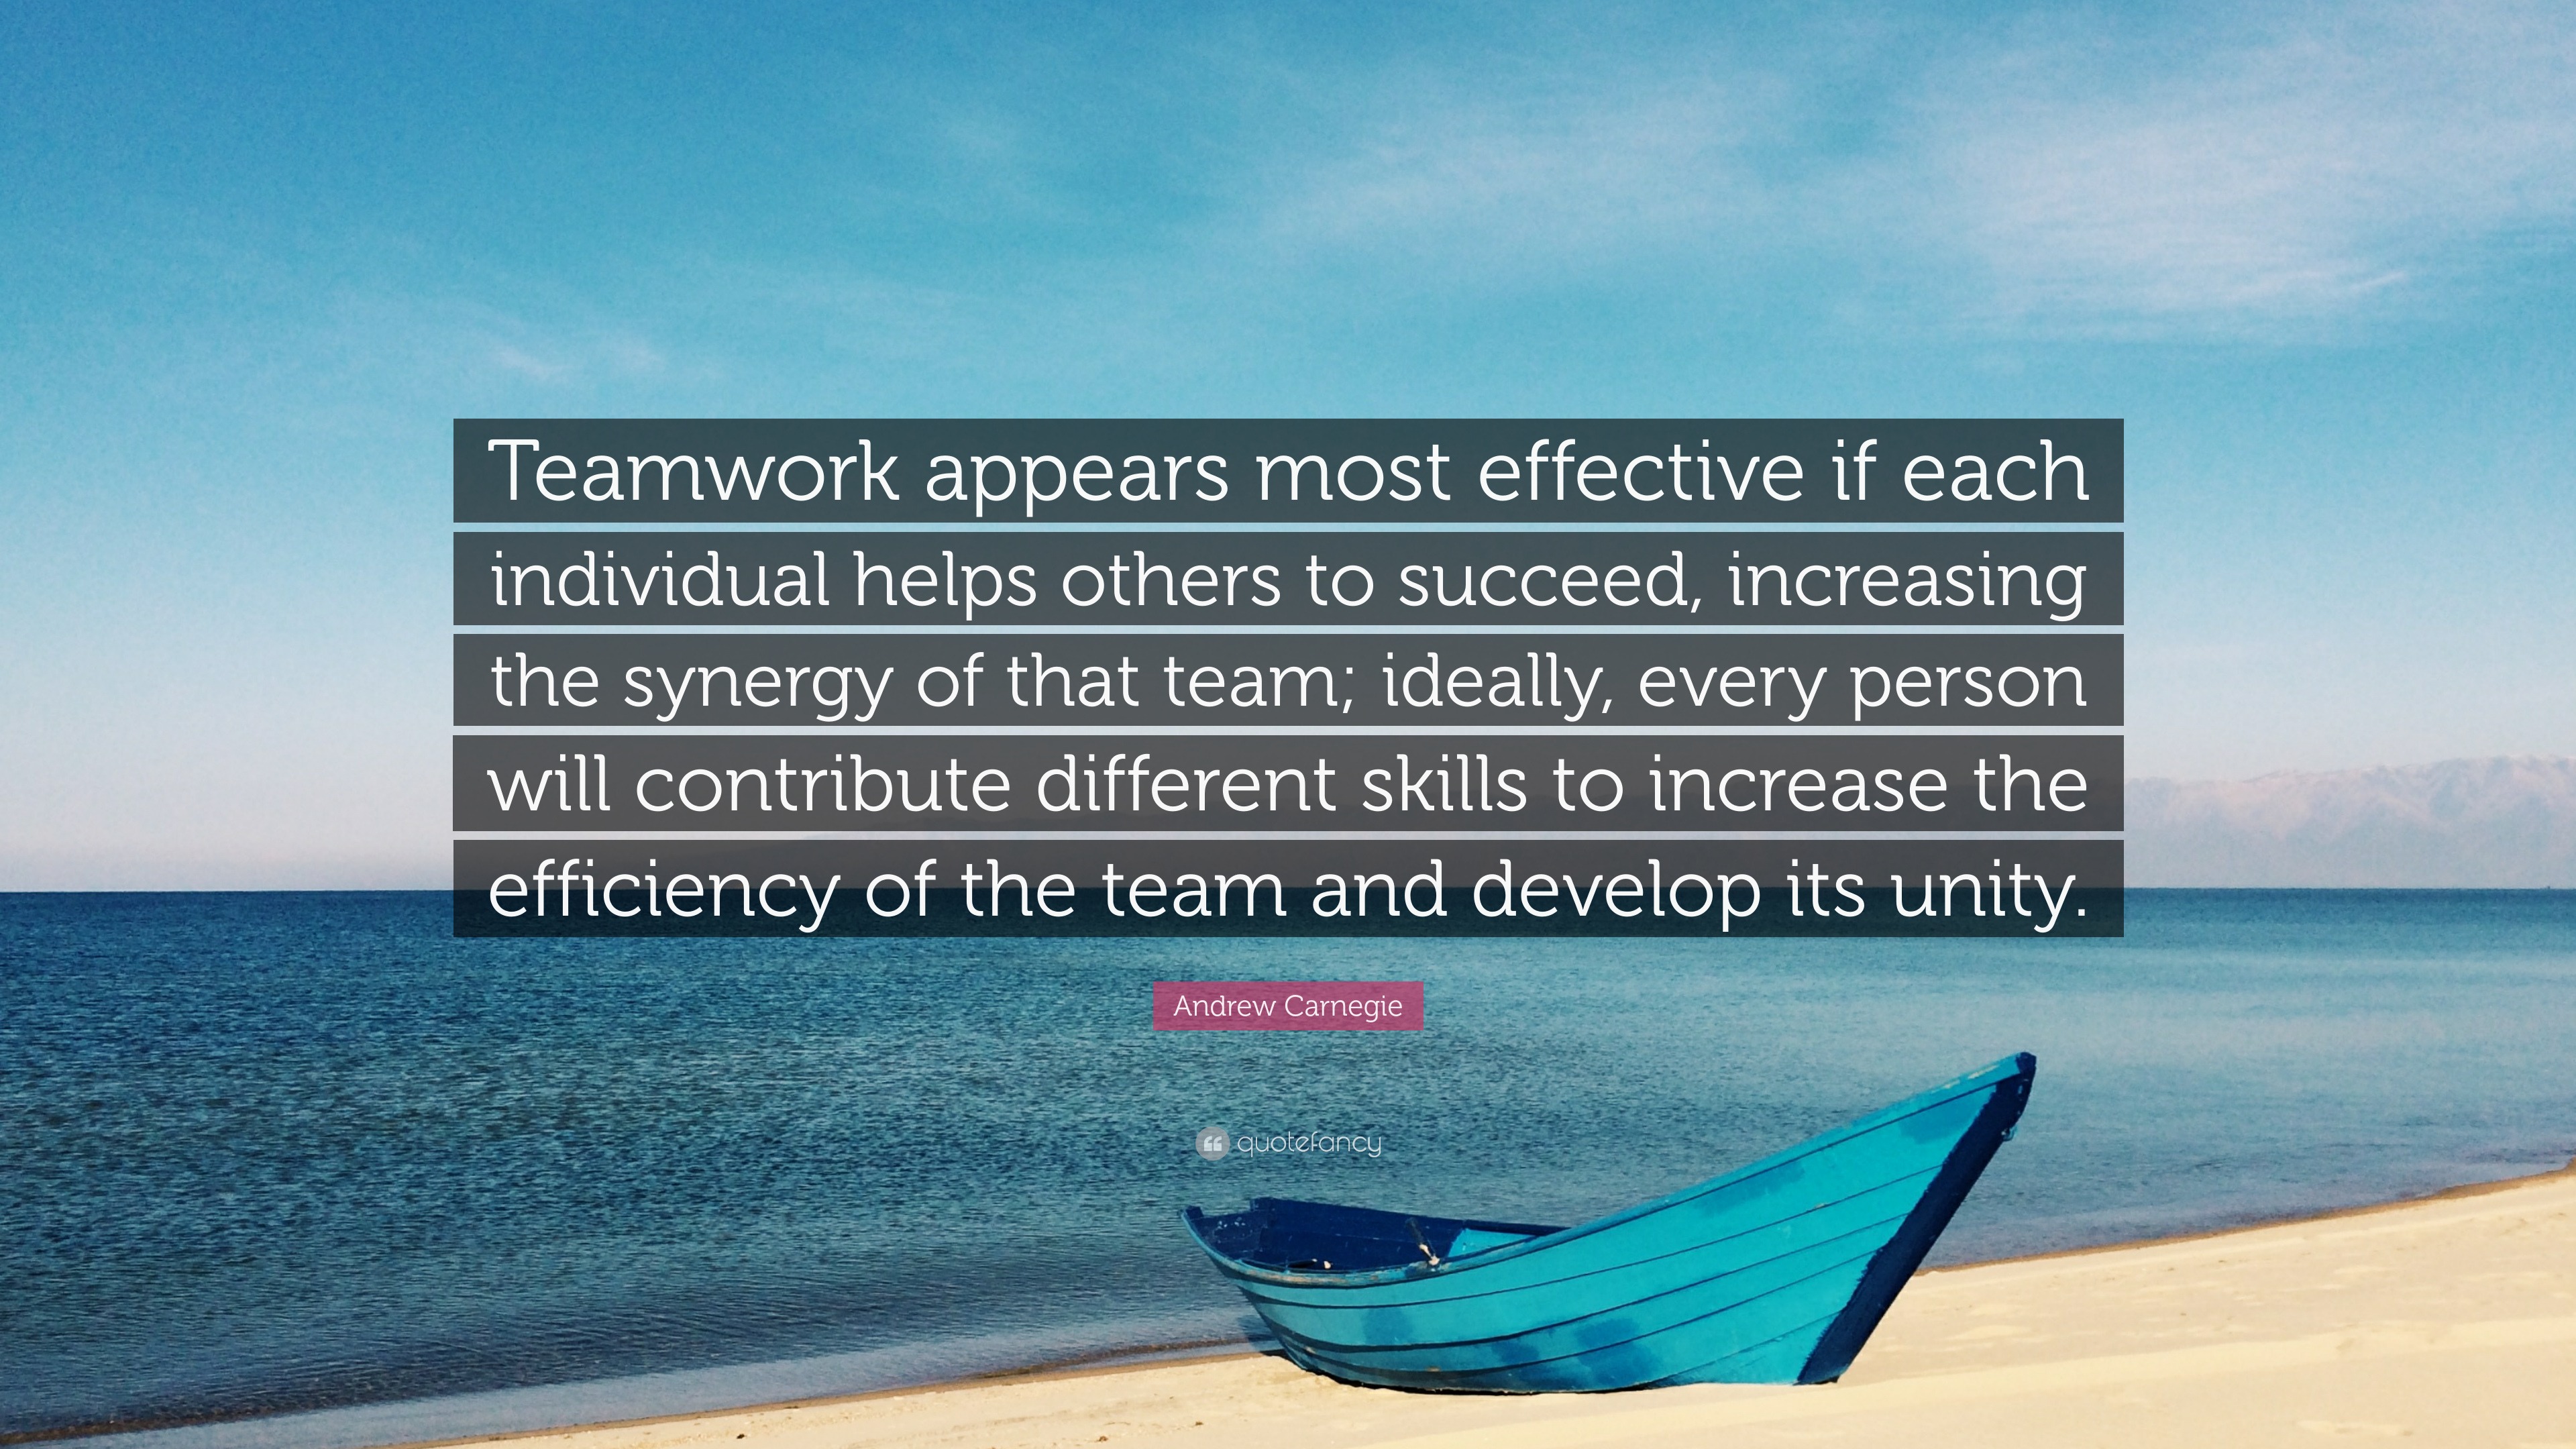 Andrew Carnegie Quote: “Teamwork appears most effective if each